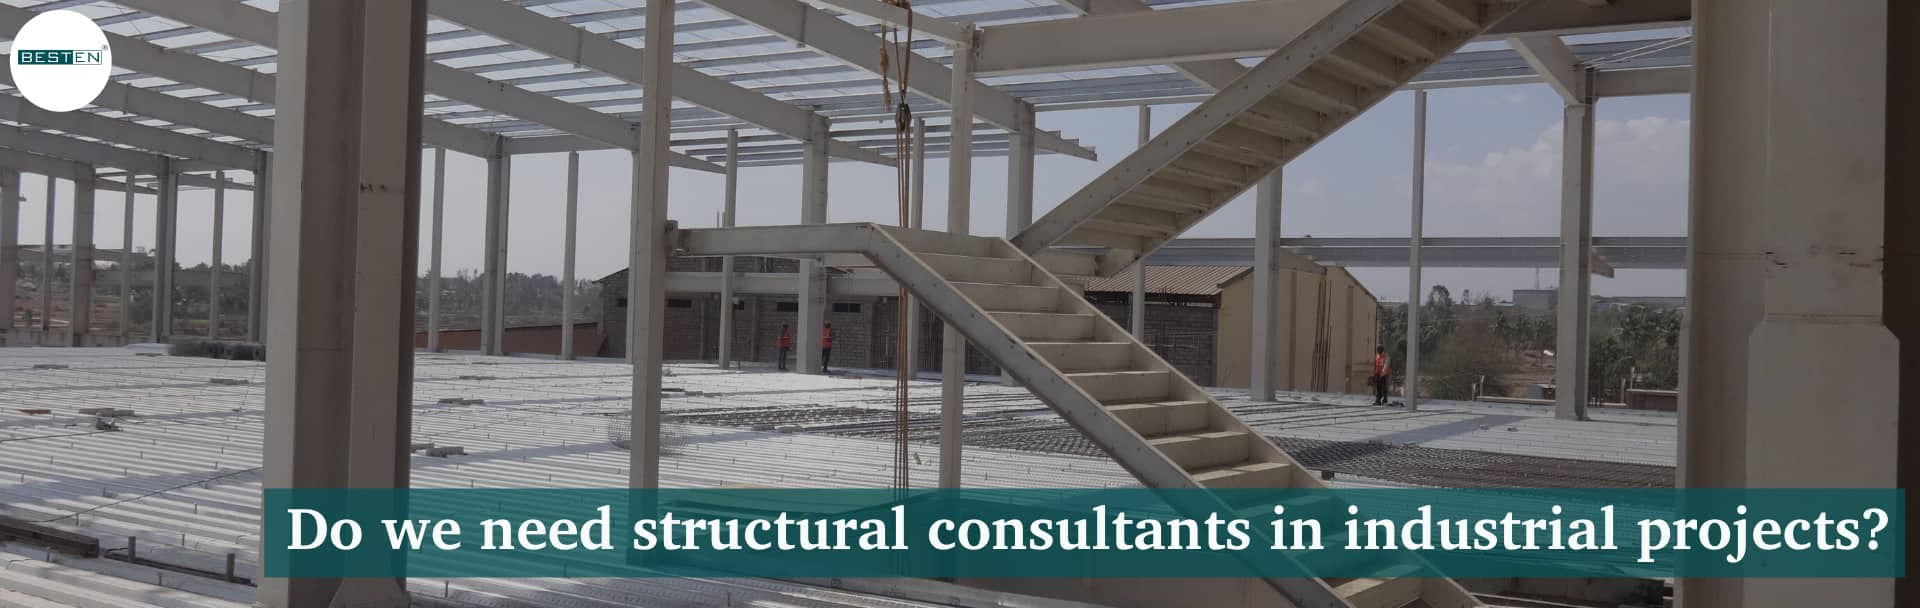 structural consultants in industrial projects